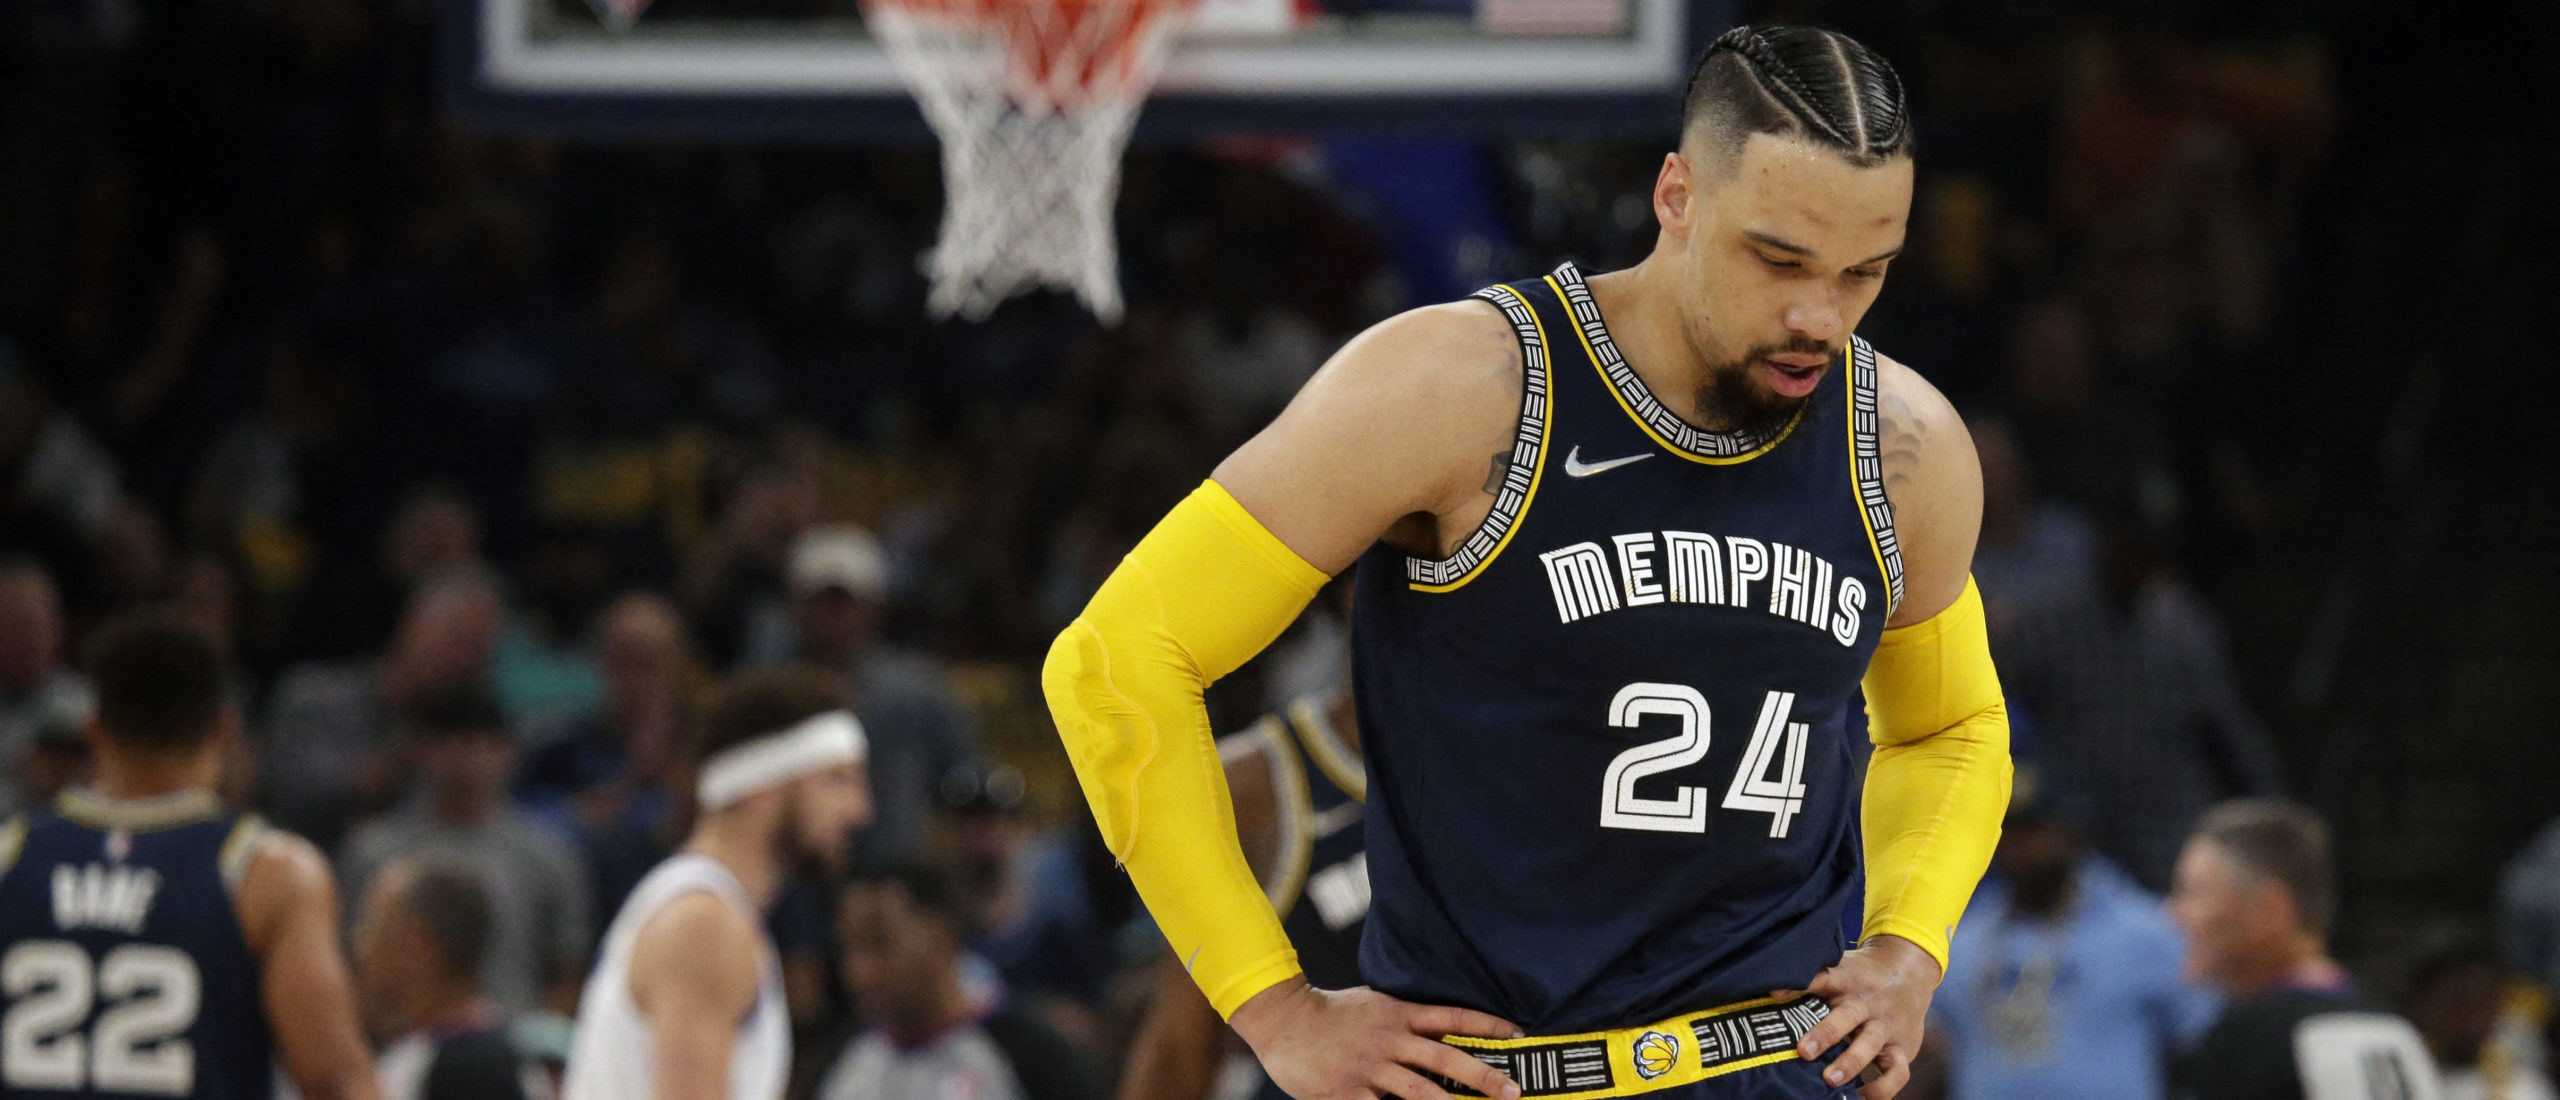 Memphis Grizzlies Star Is Suspended For Next Playoff Game After Hard Foul